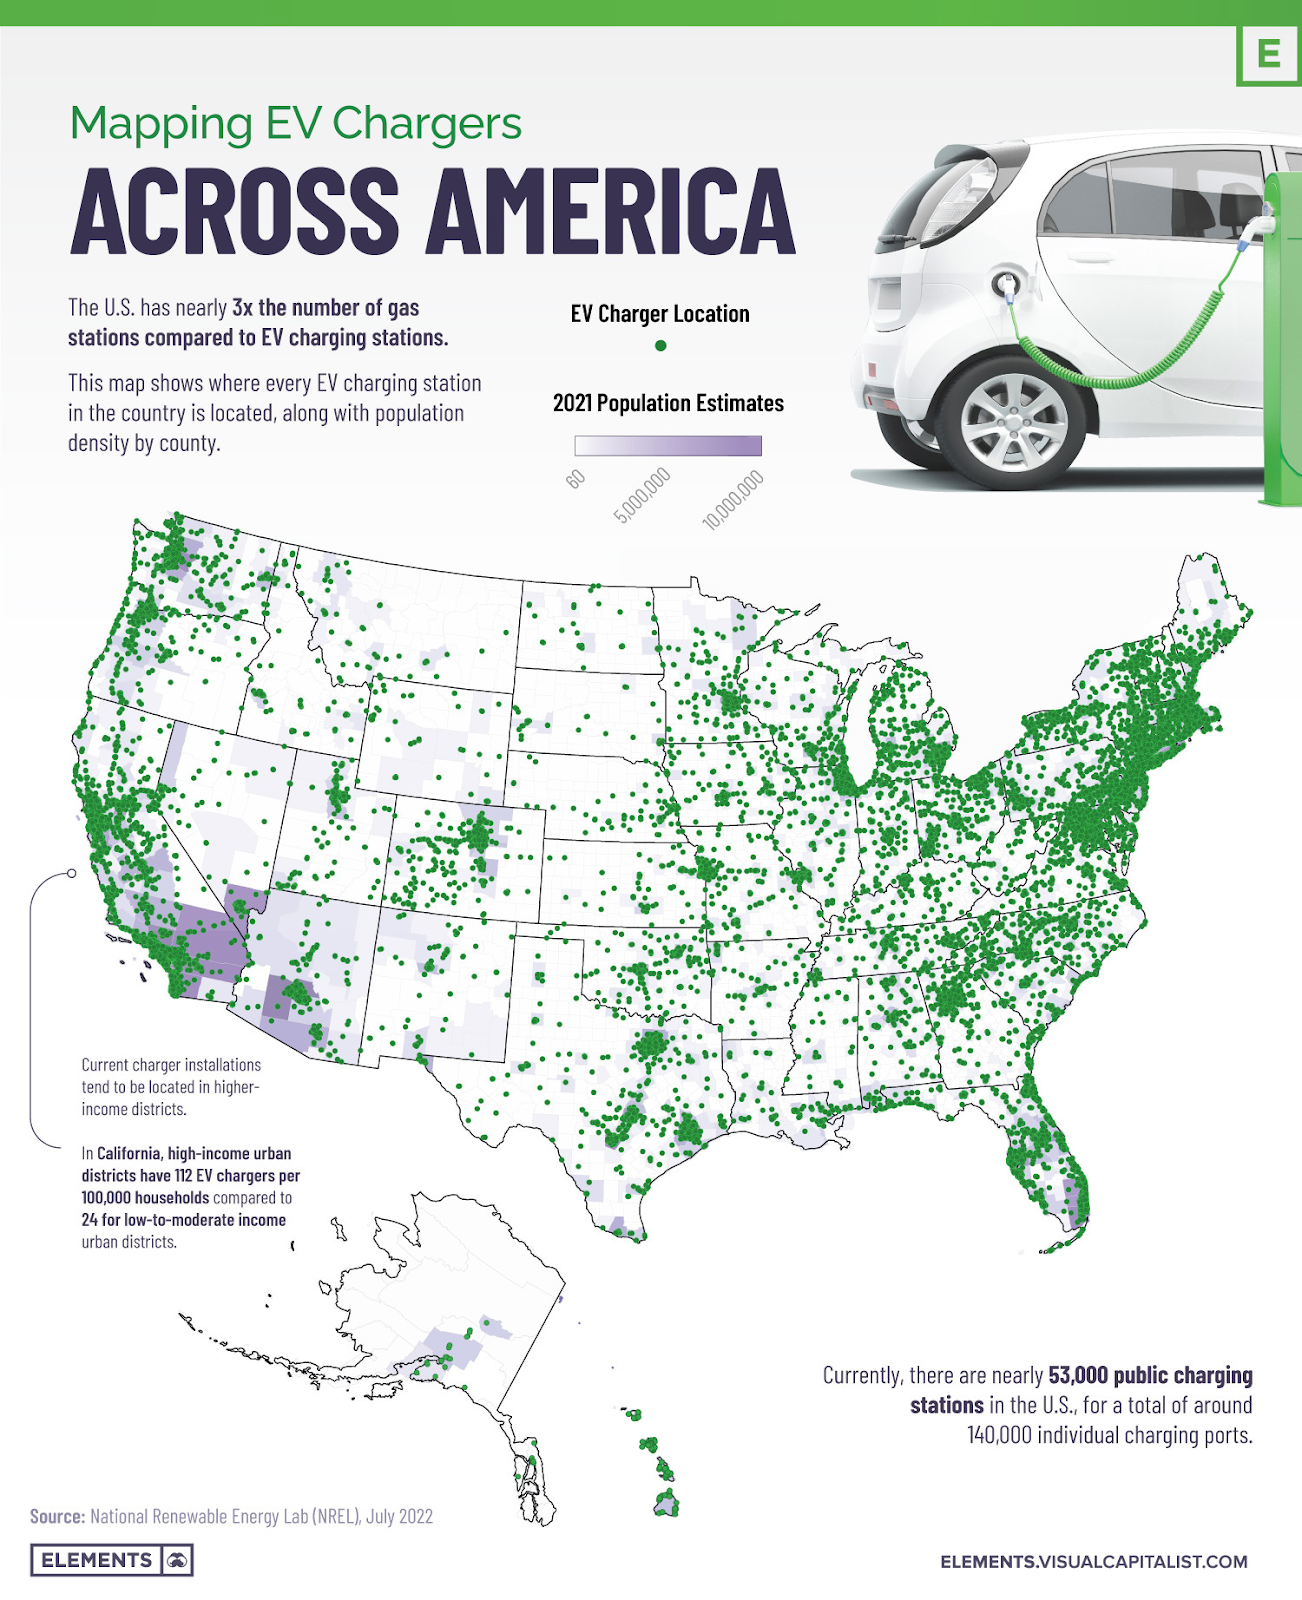 An infographic on EV chargers in US